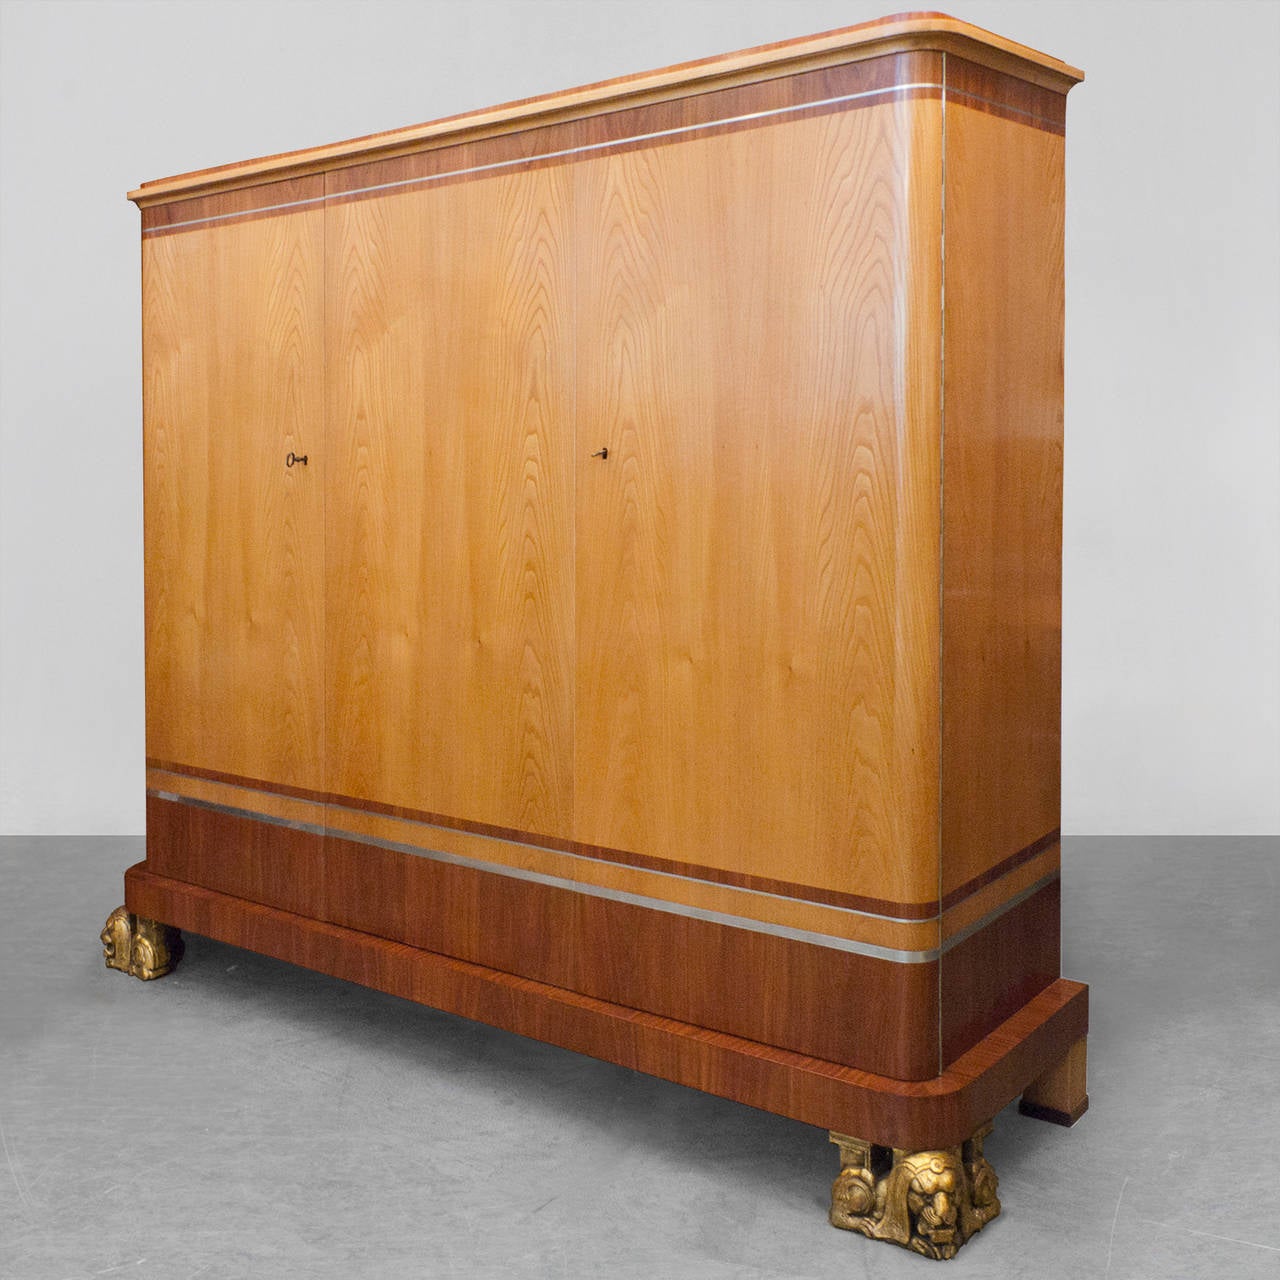 Fantastic Swedish Art Deco 3-door cabinet designed by architect Carl Bergsten. The cabinet is veneered in elm and mahogany and inlayed with bands of pewter. The two front feet are carved gilt wood in the form of resting lions. Double doors on the